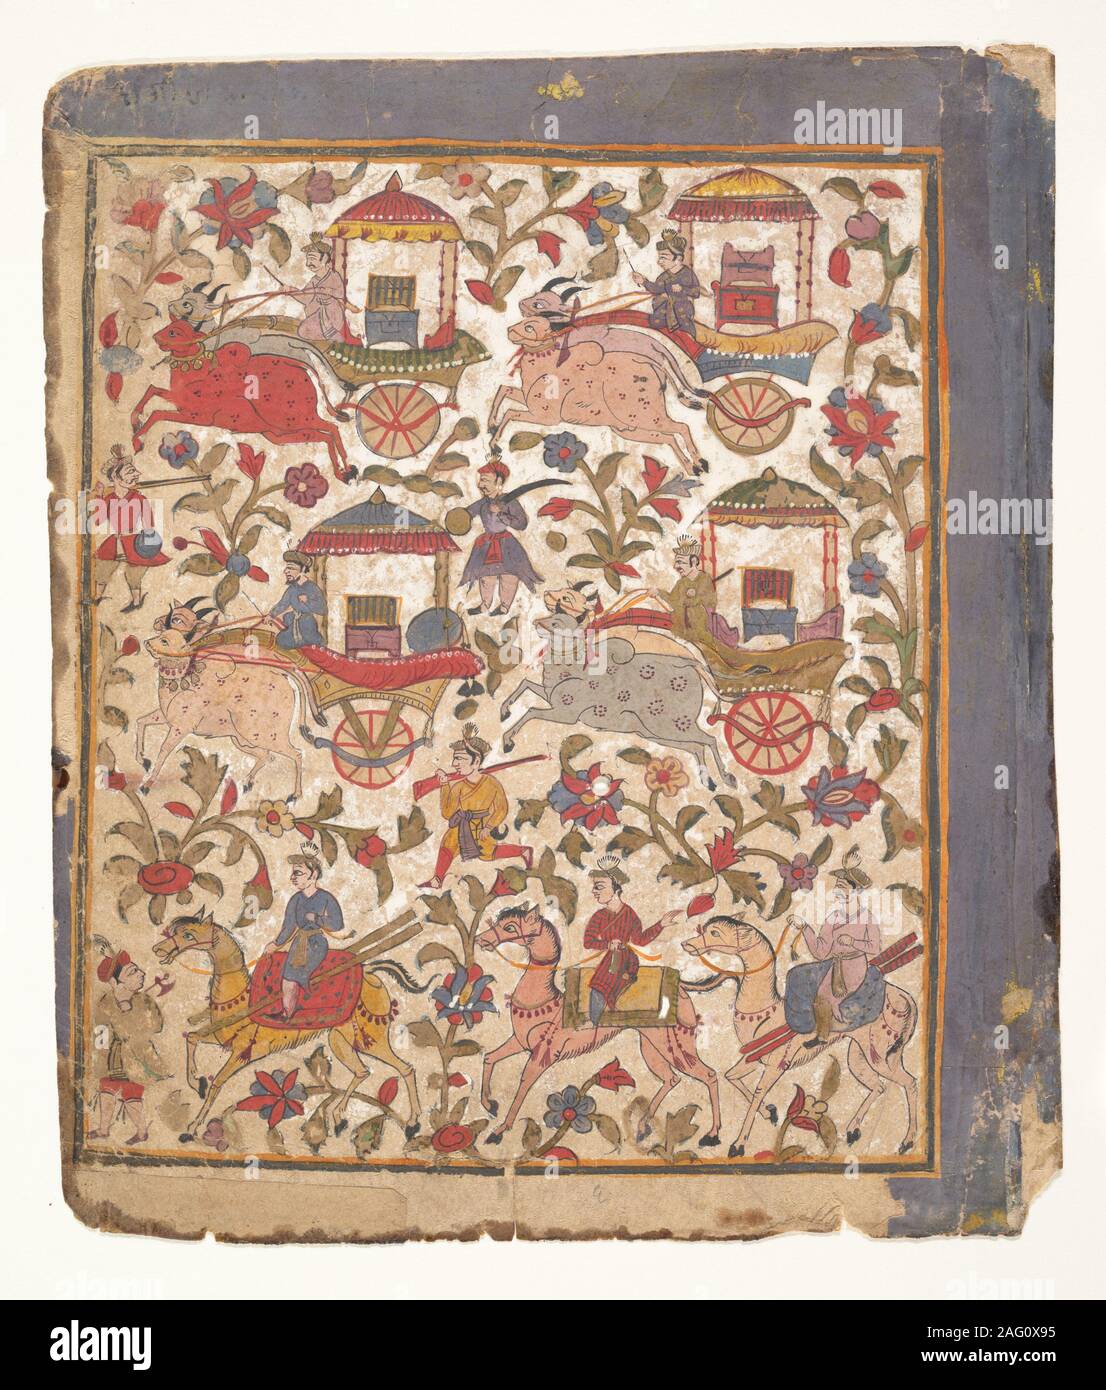 Procession of Carriages Carrying Booty: Page from a Dispersed Bhagavata Purana Manuscript , ca. 1640-50. Stock Photo